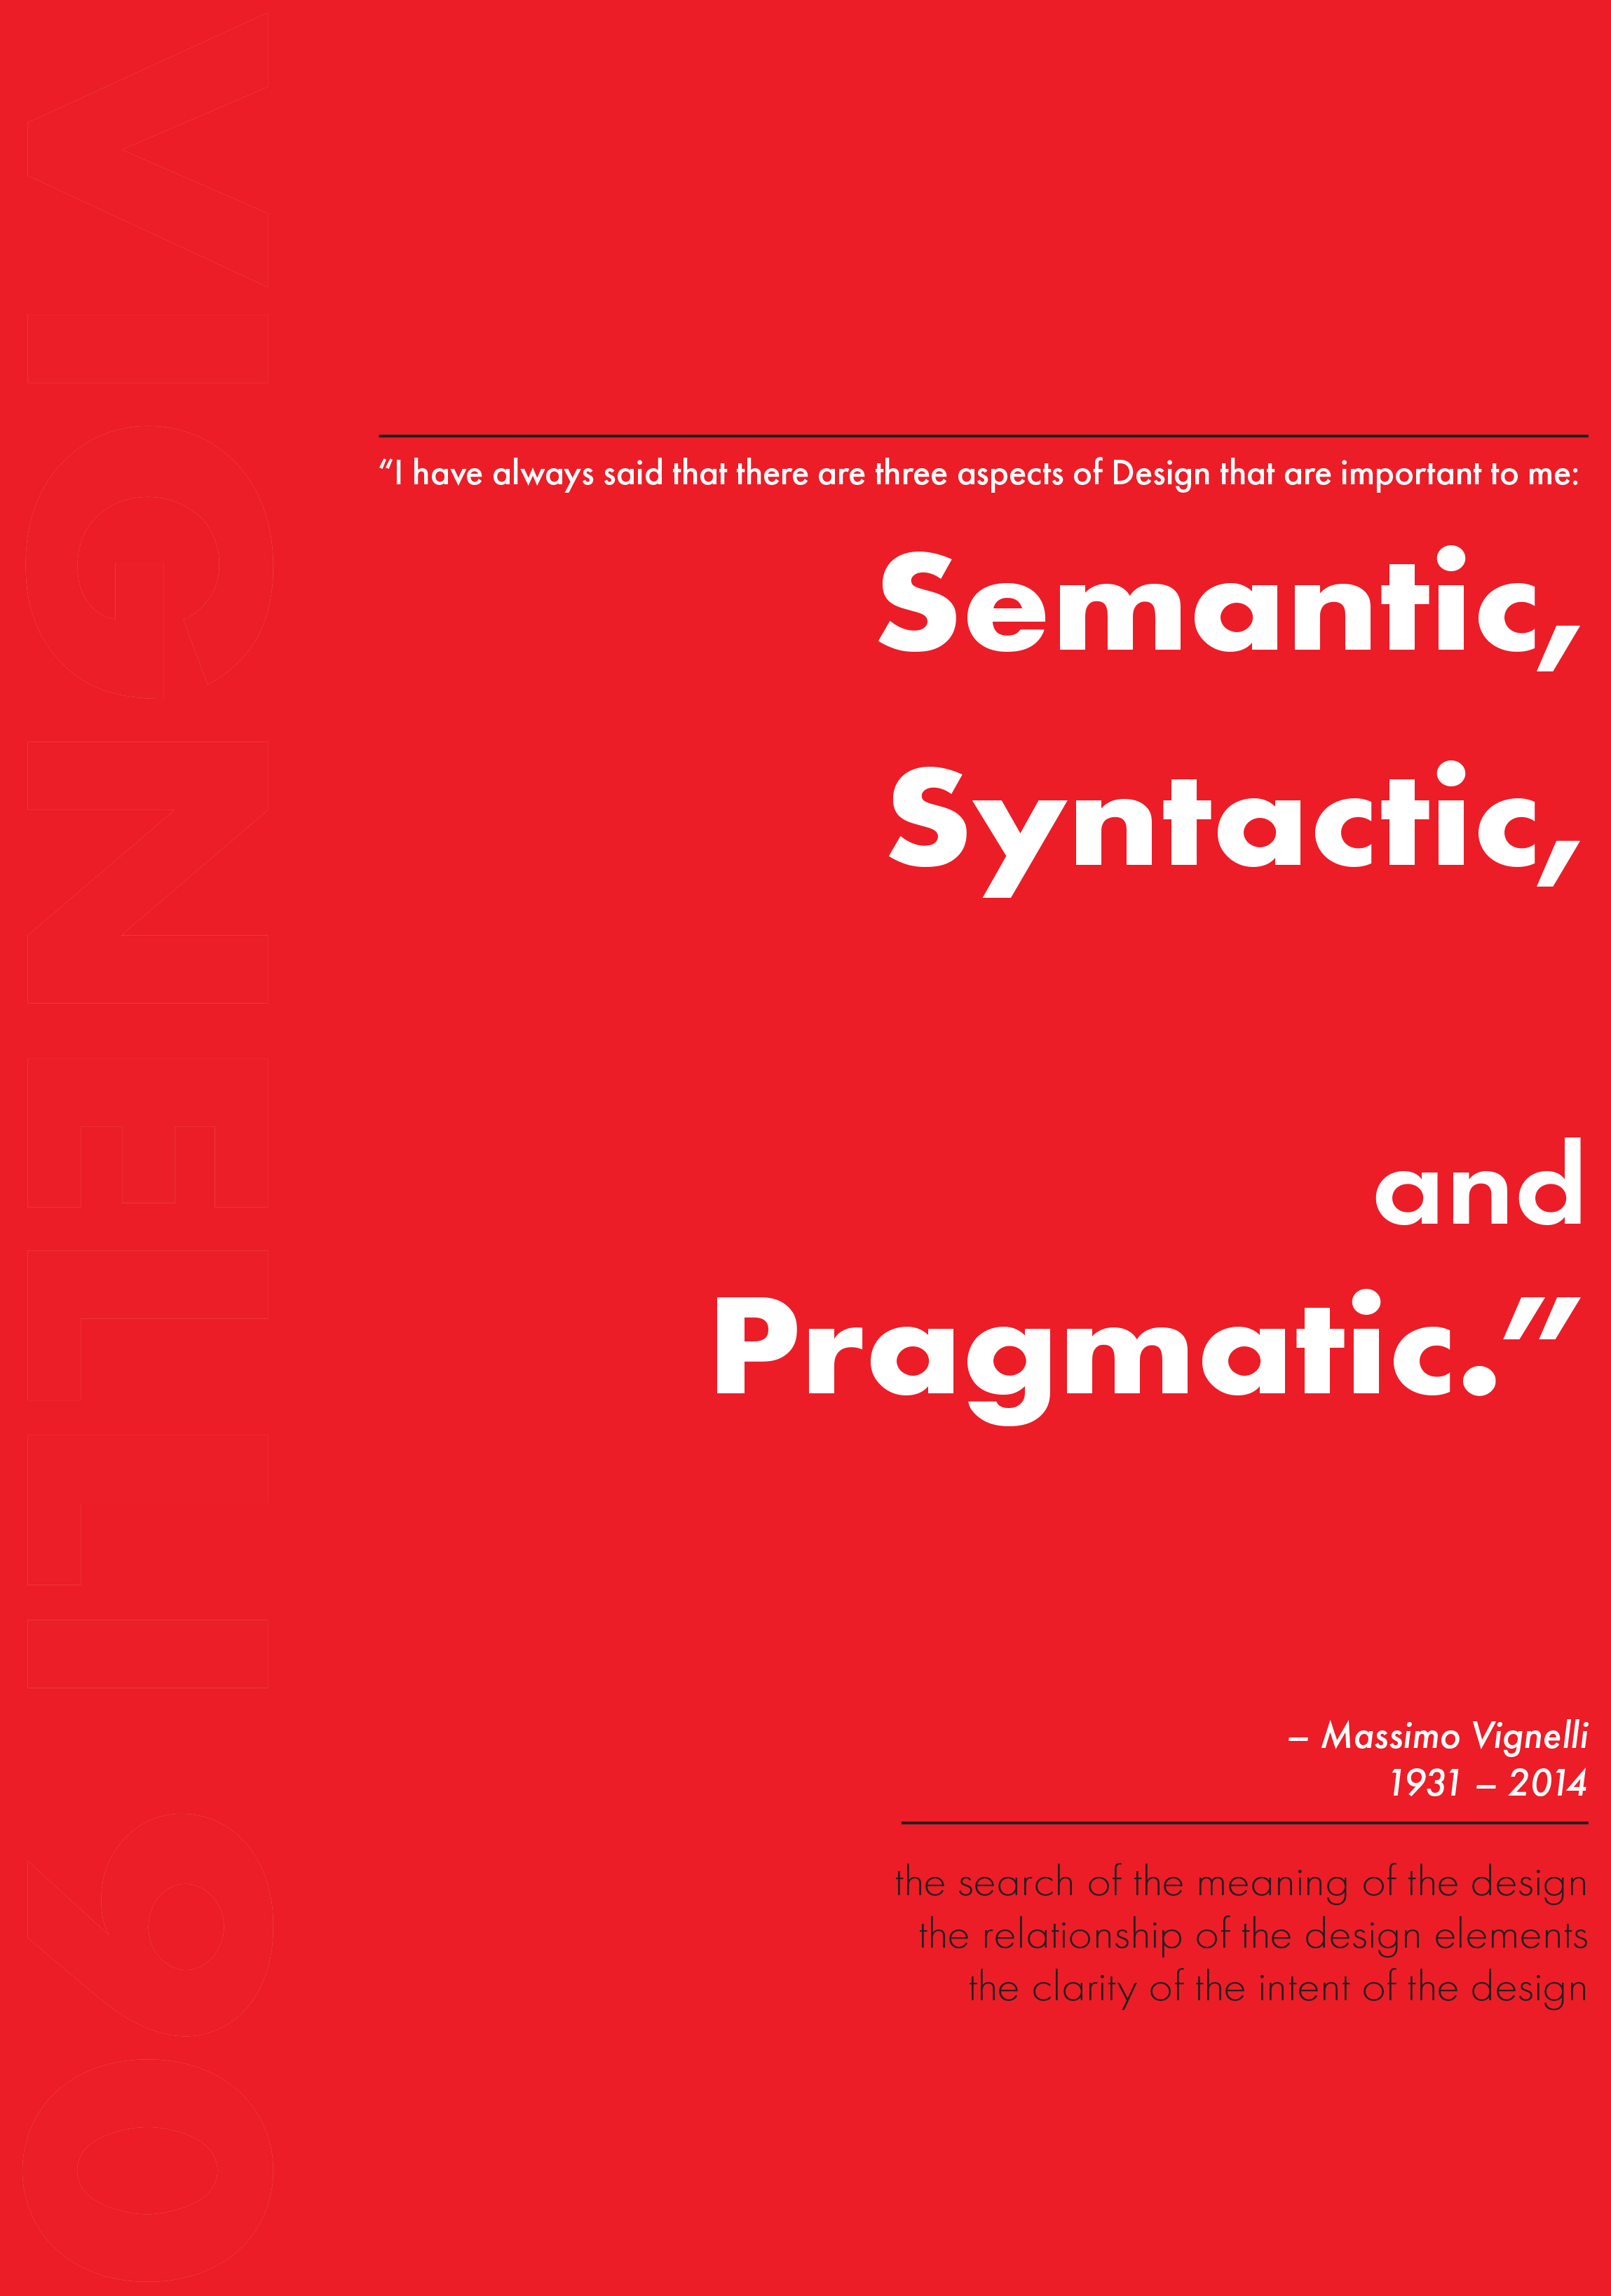 Red poster designed by Joey Winton and inspired by Massimo Vignelli.